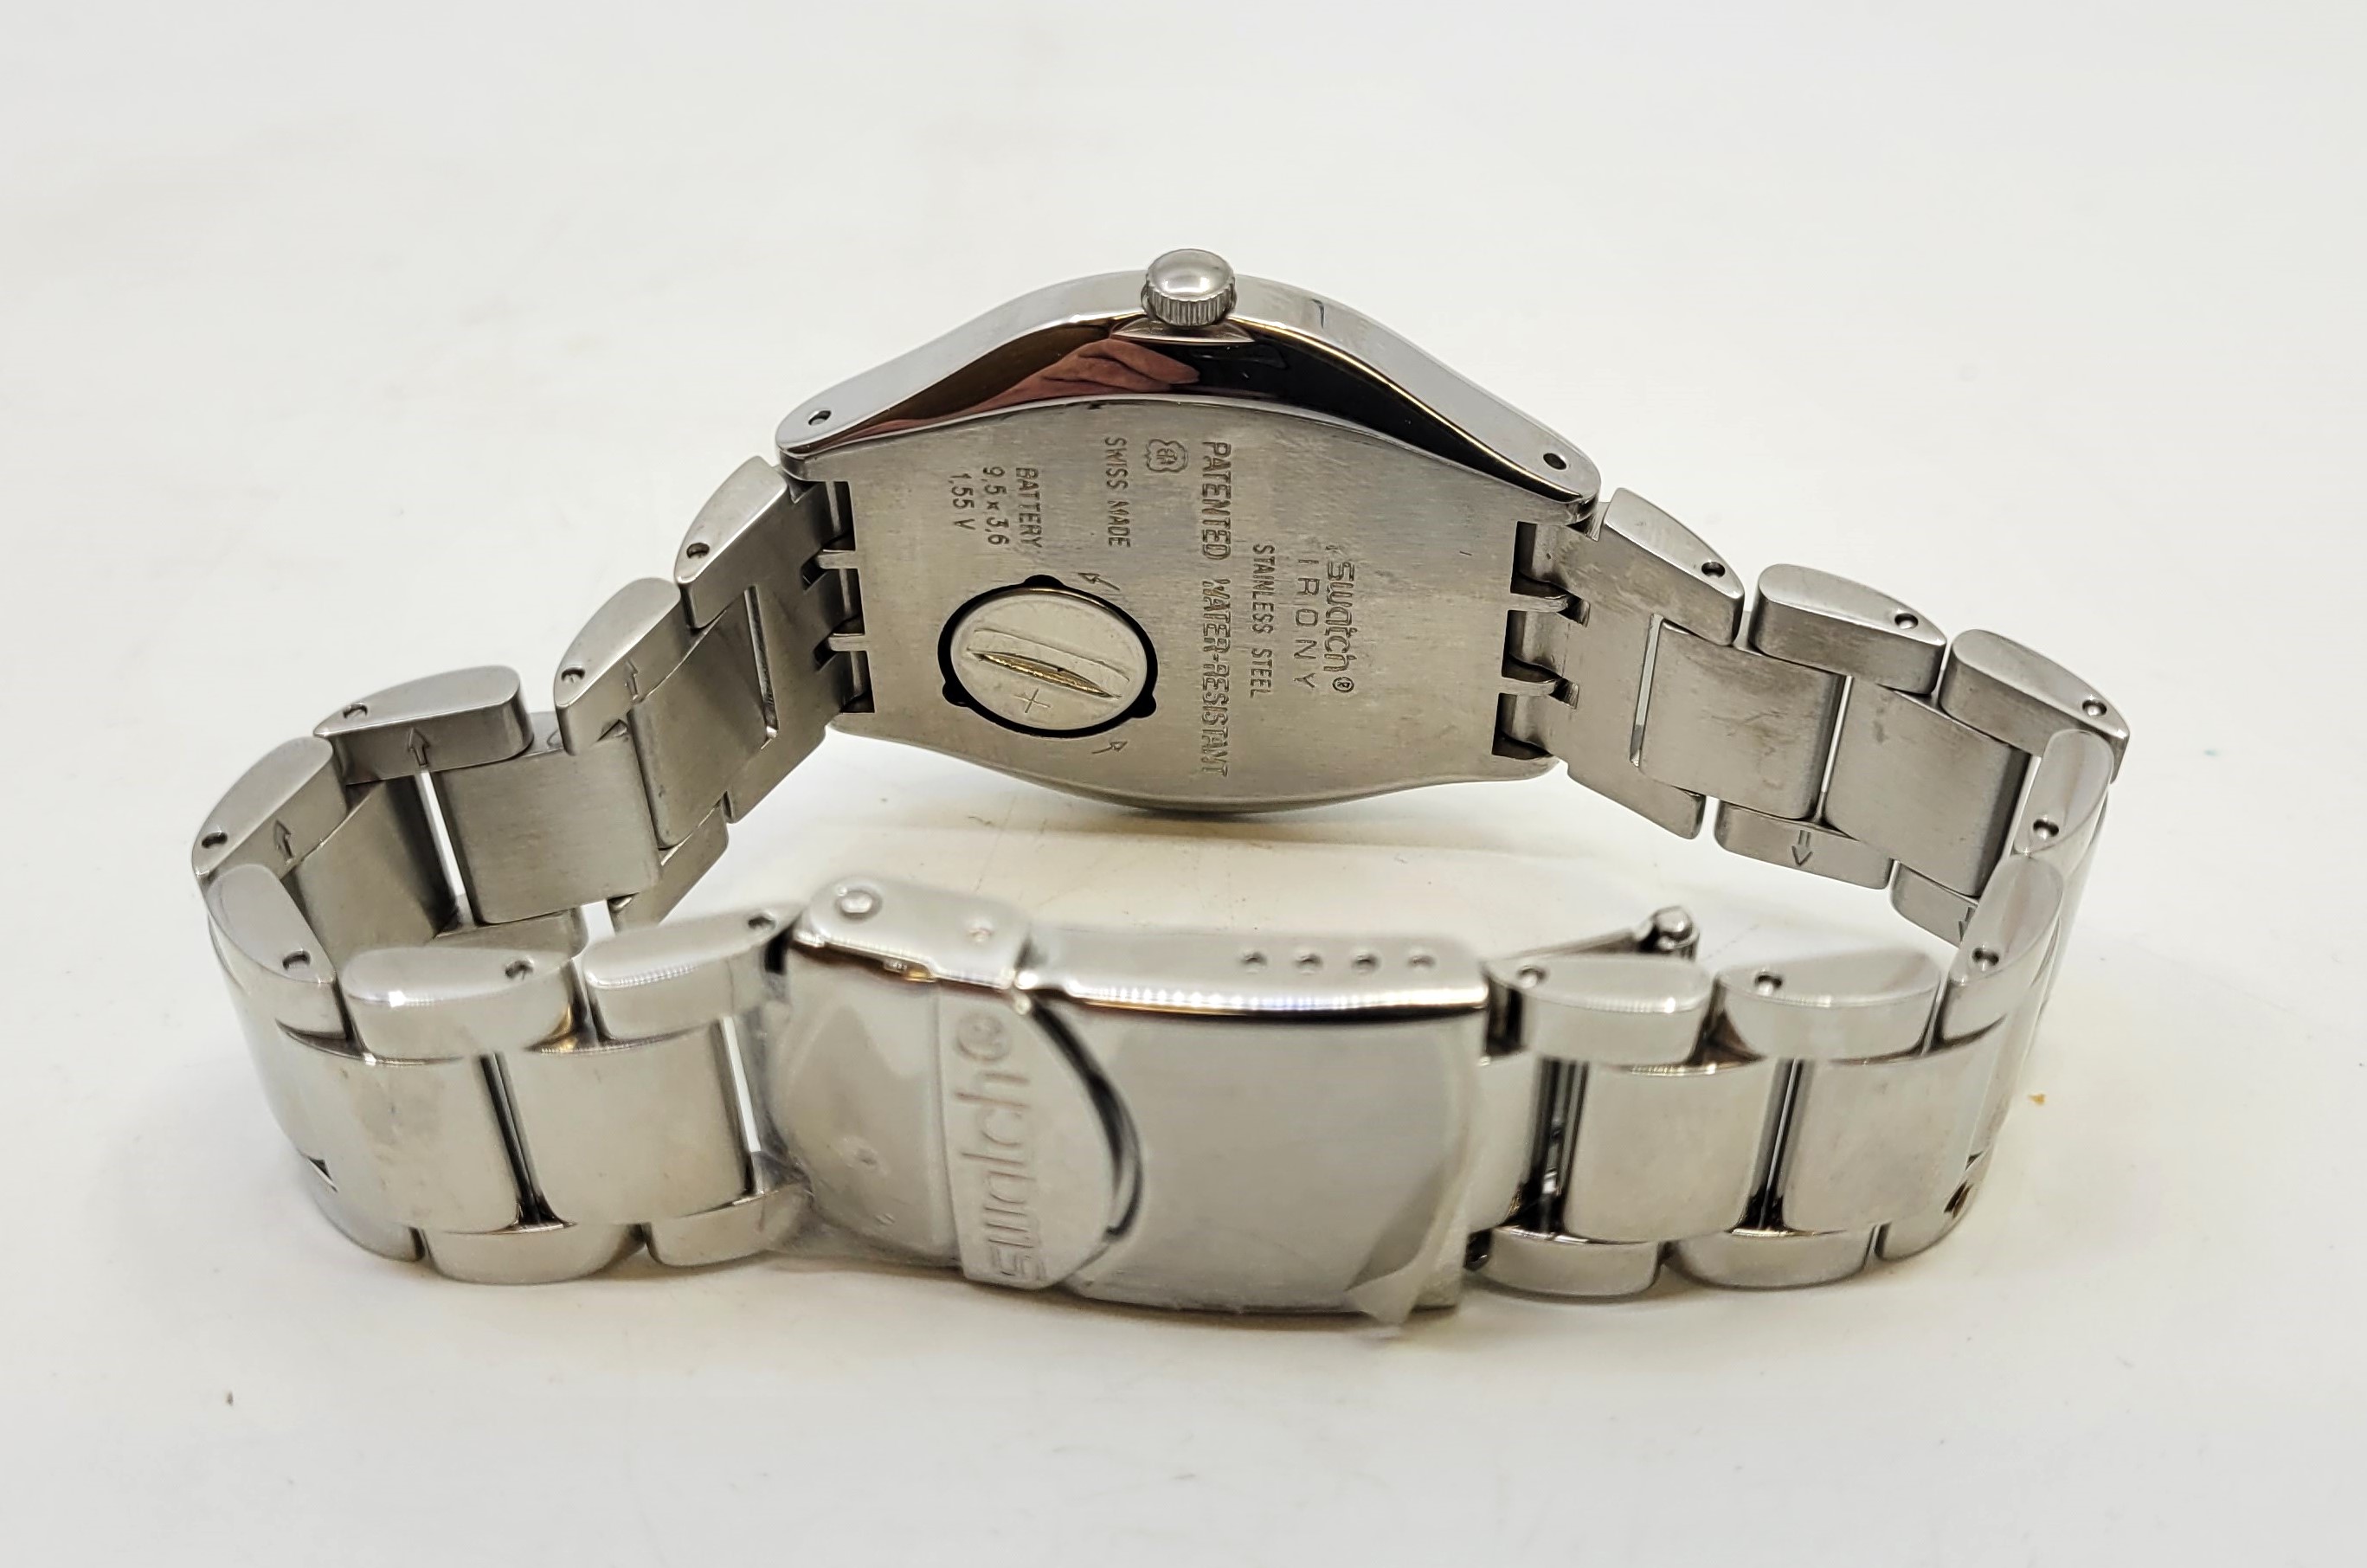 A Swatch Irony stainless steel quartz bracelet watch, unused in original box with papers, together - Image 3 of 18